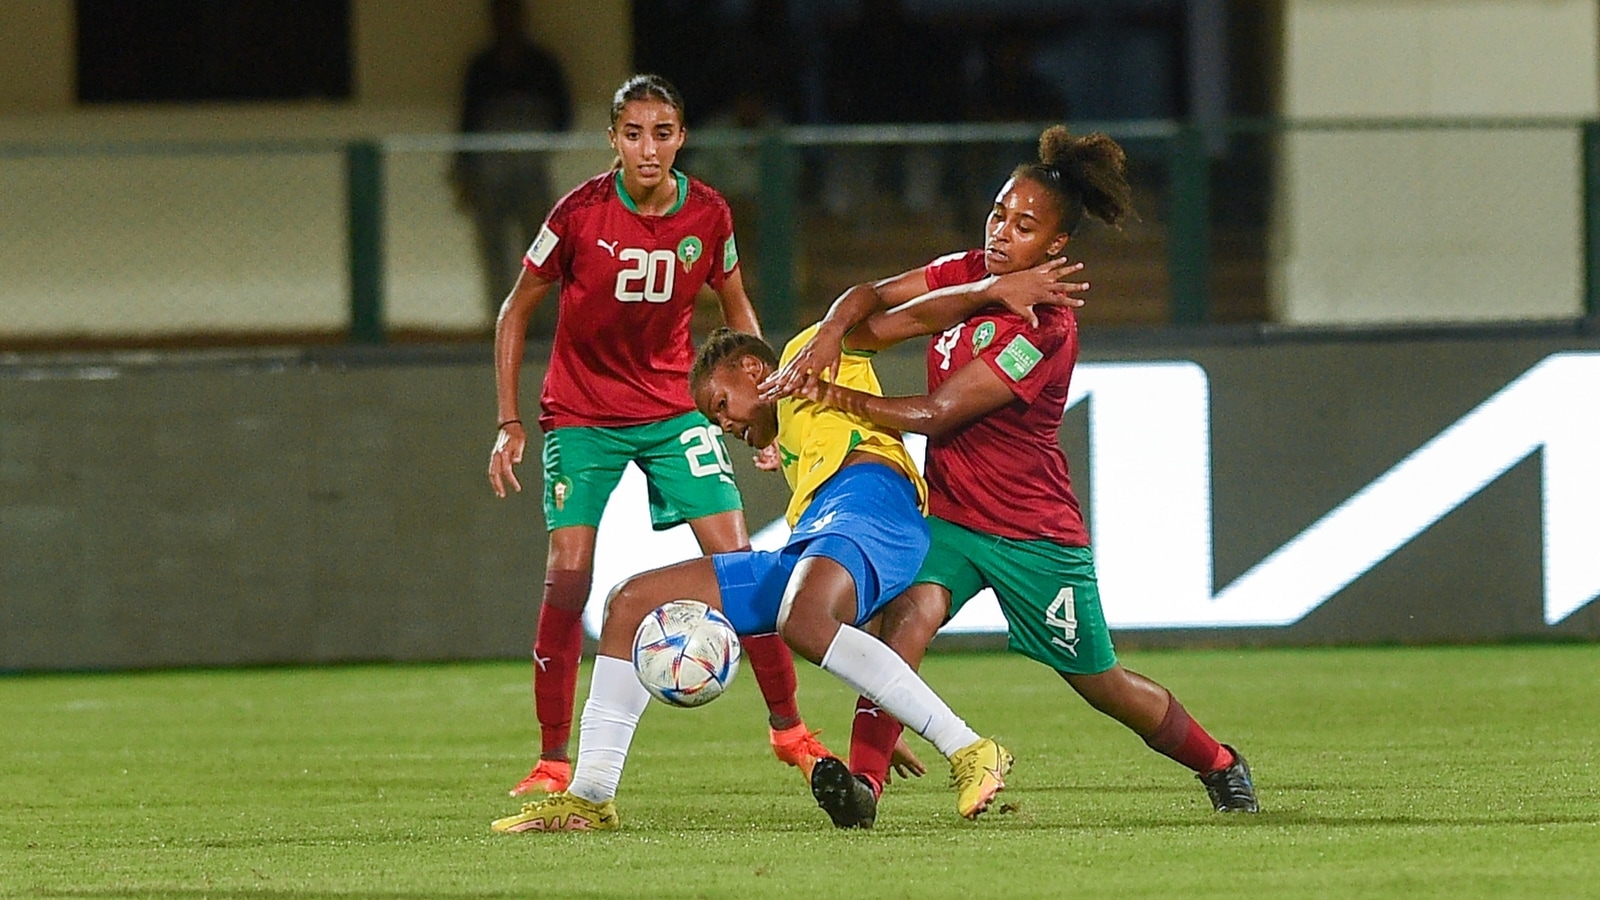 brazil-open-under-17-women-s-world-cup-with-1-0-win-against-morocco